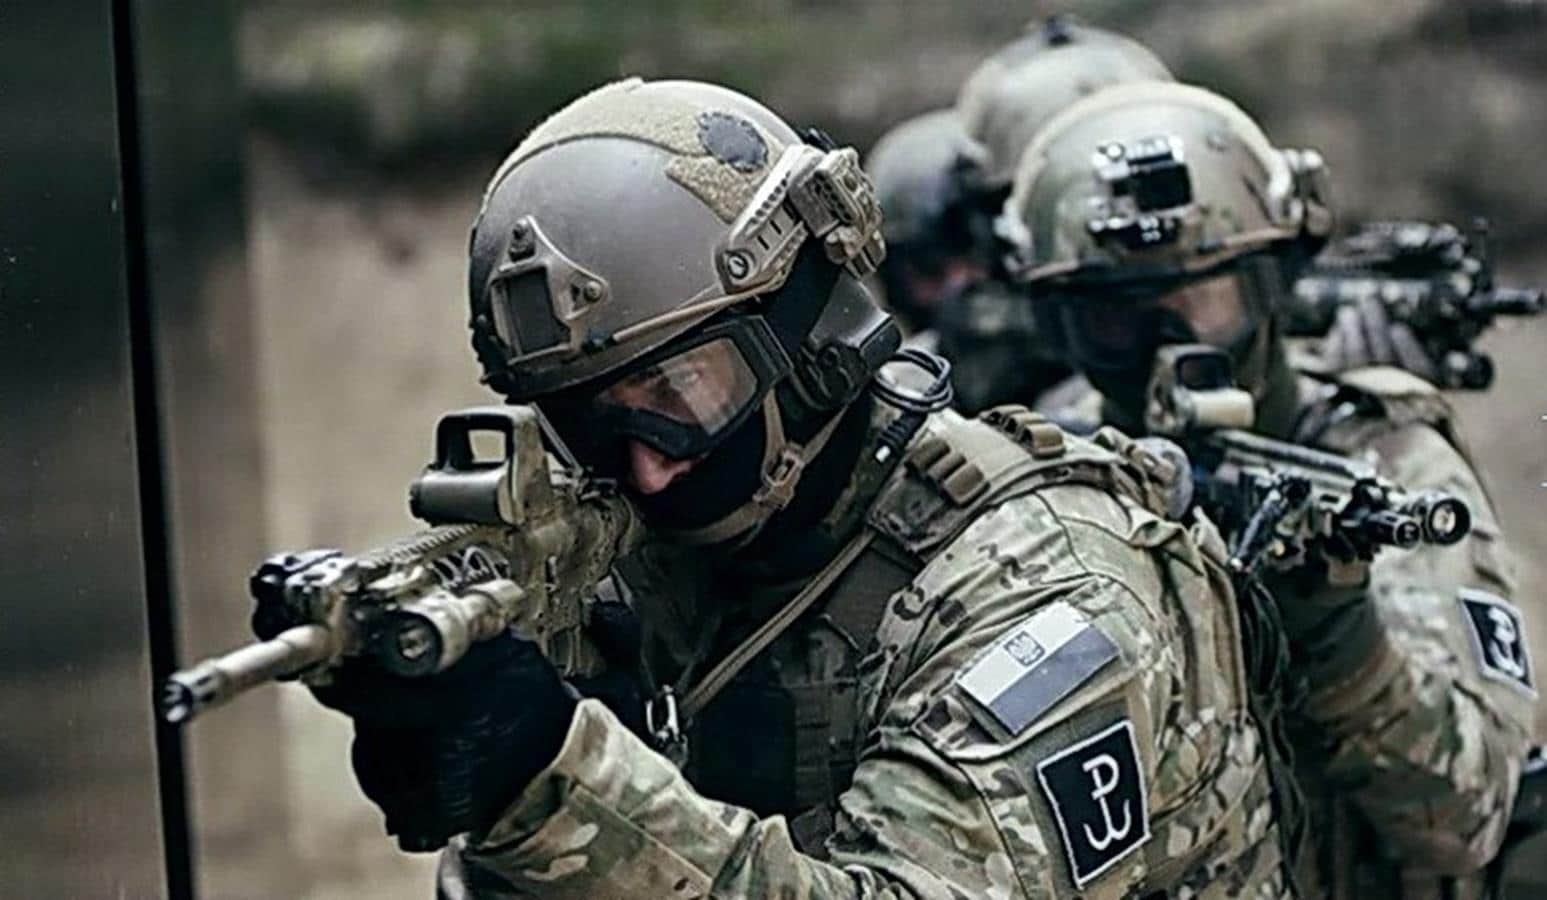 New uniforms for the Polish Special Forces.  What is known about them?